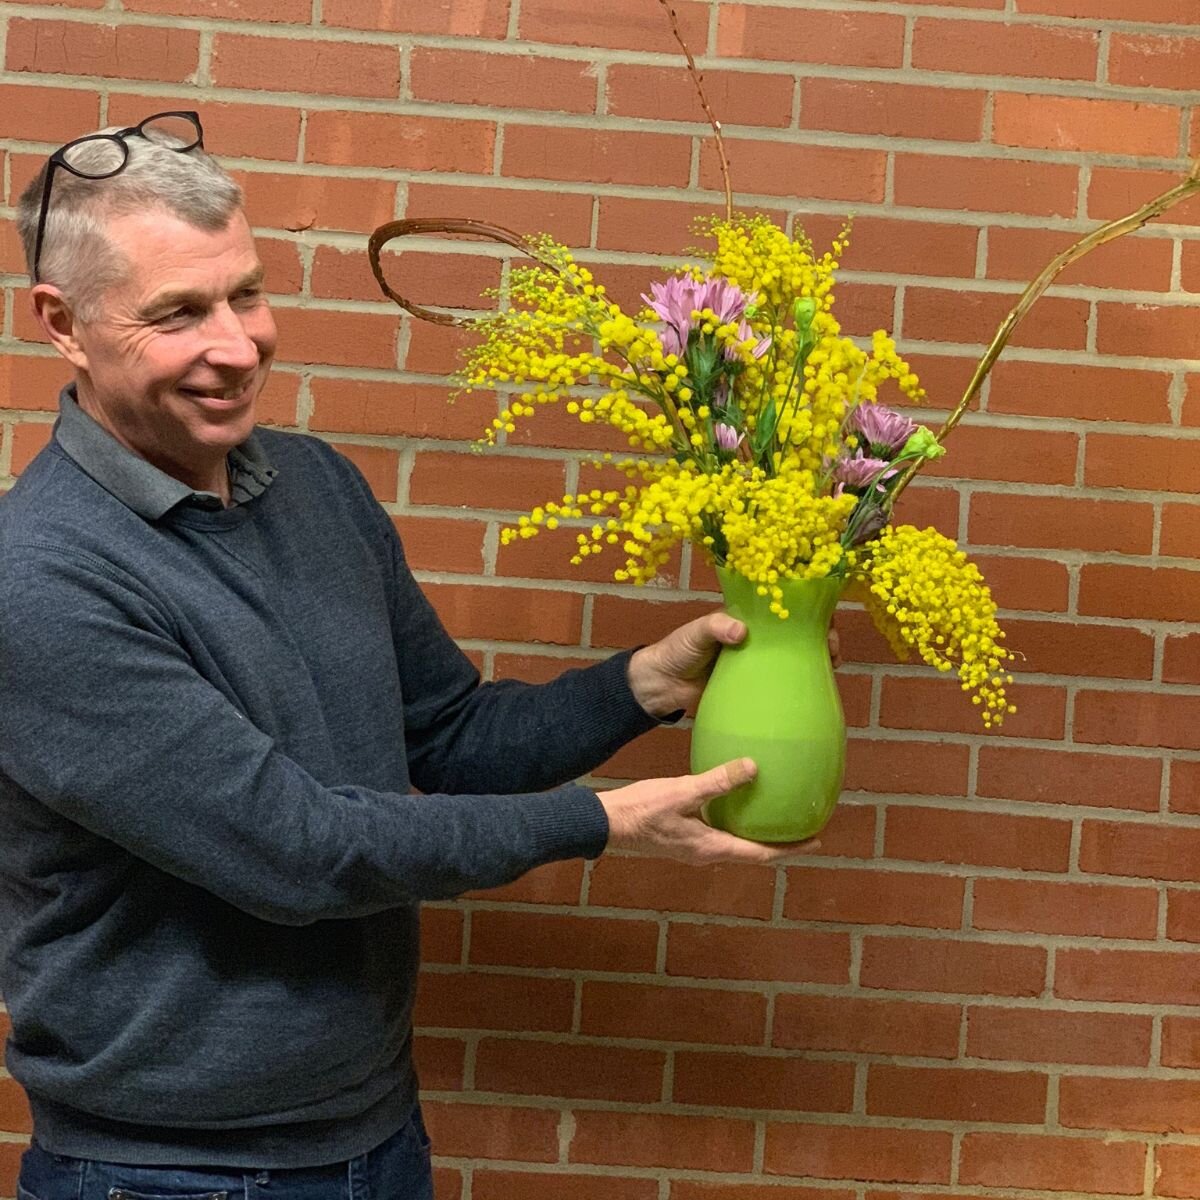 dad with yellow flowers.jpg